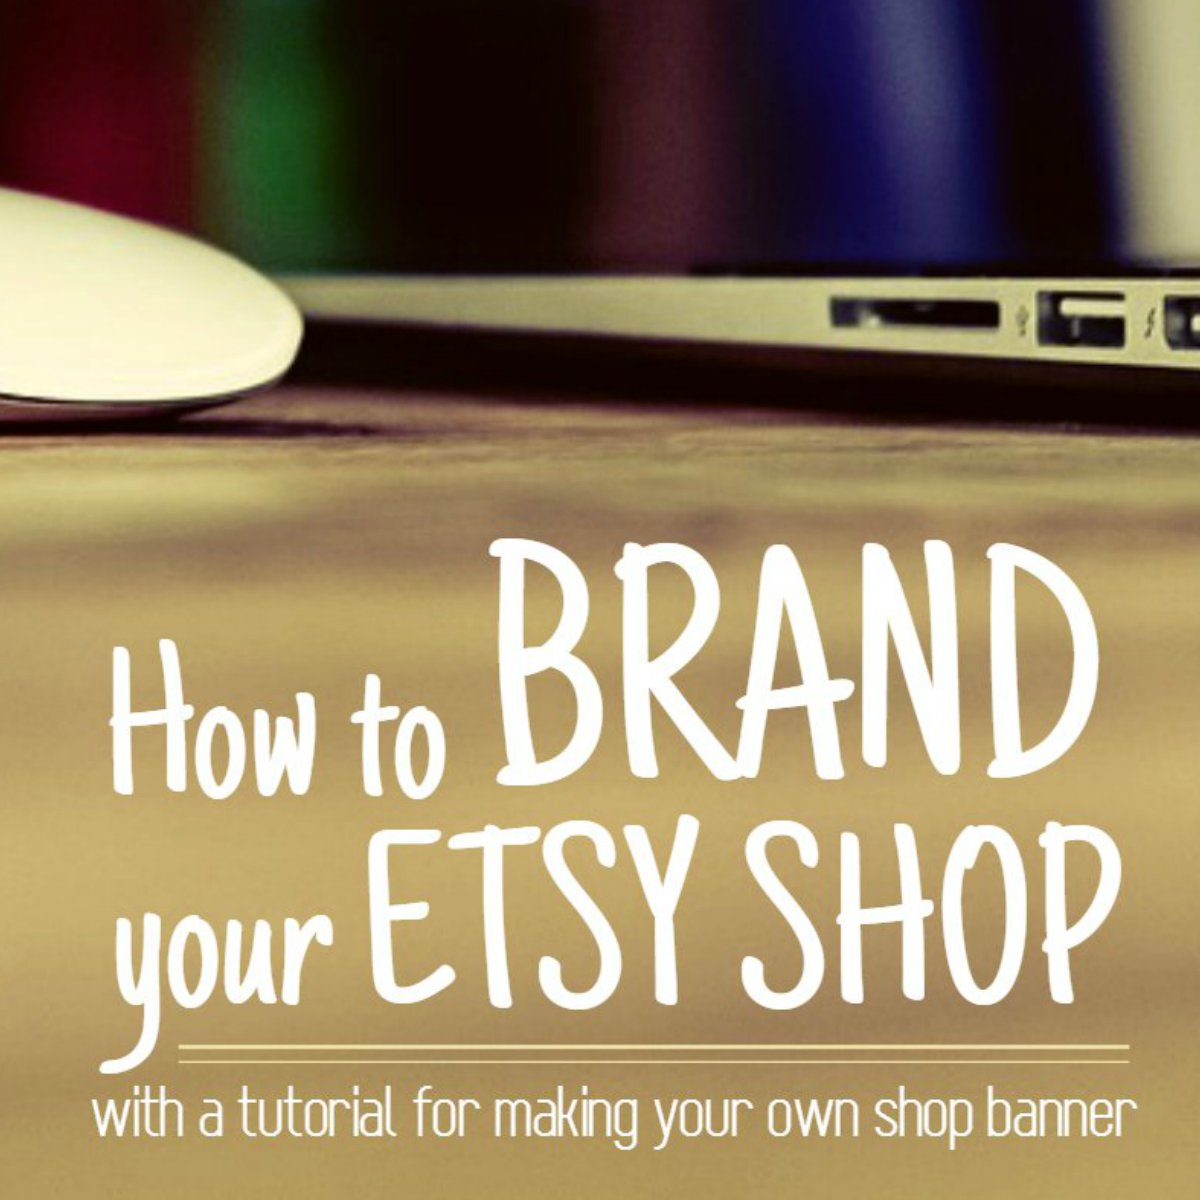 How to Brand your Etsy Shop